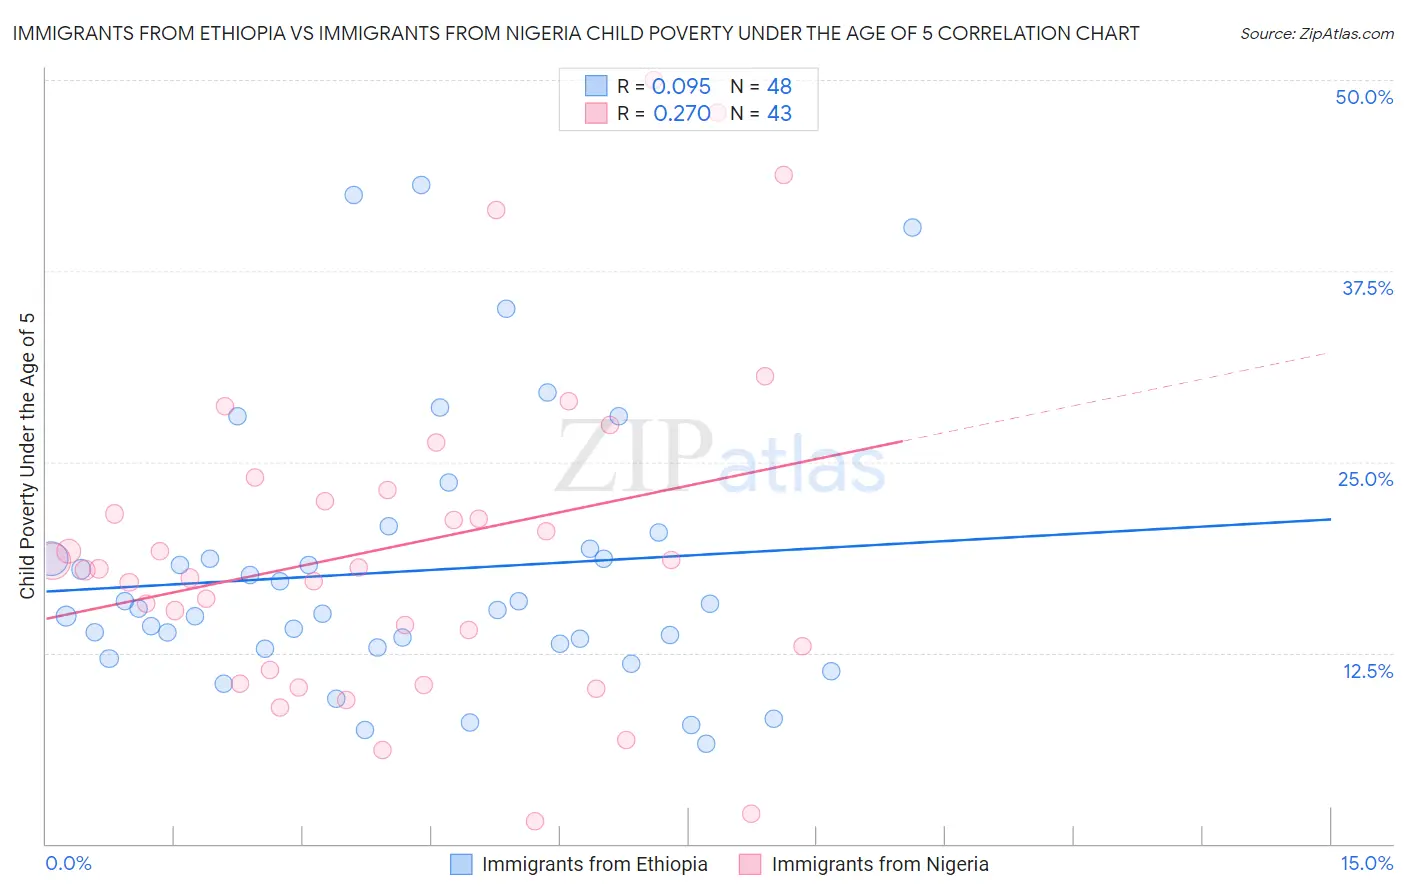 Immigrants from Ethiopia vs Immigrants from Nigeria Child Poverty Under the Age of 5